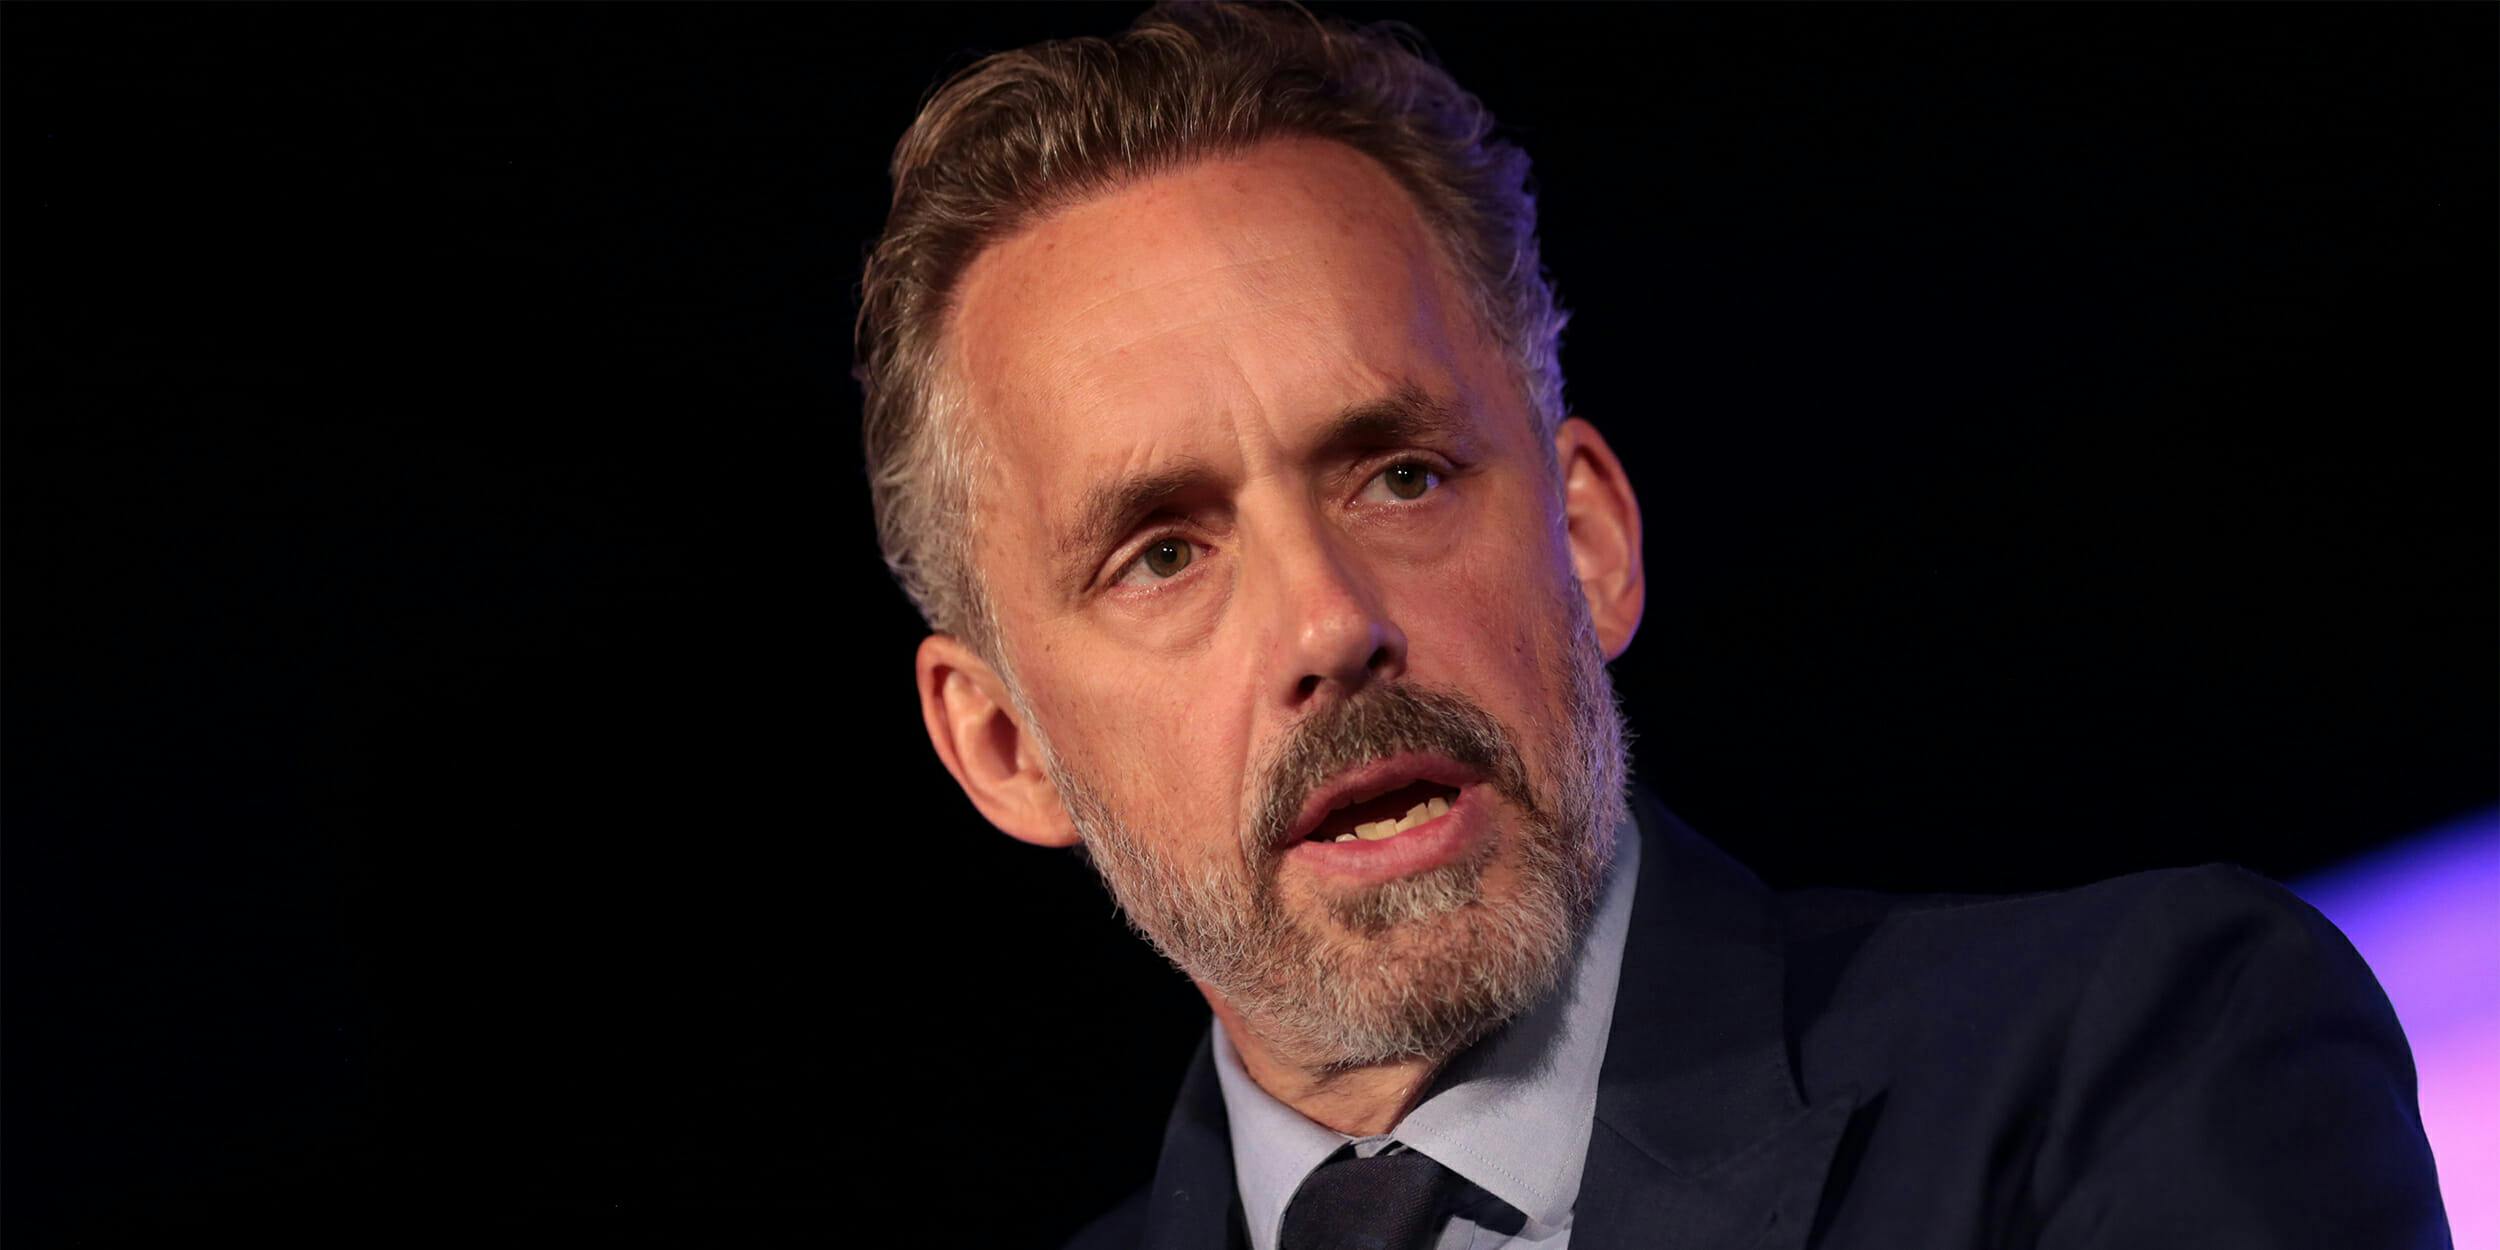 Jordan Peterson: The Hollow Lessons of His Summer